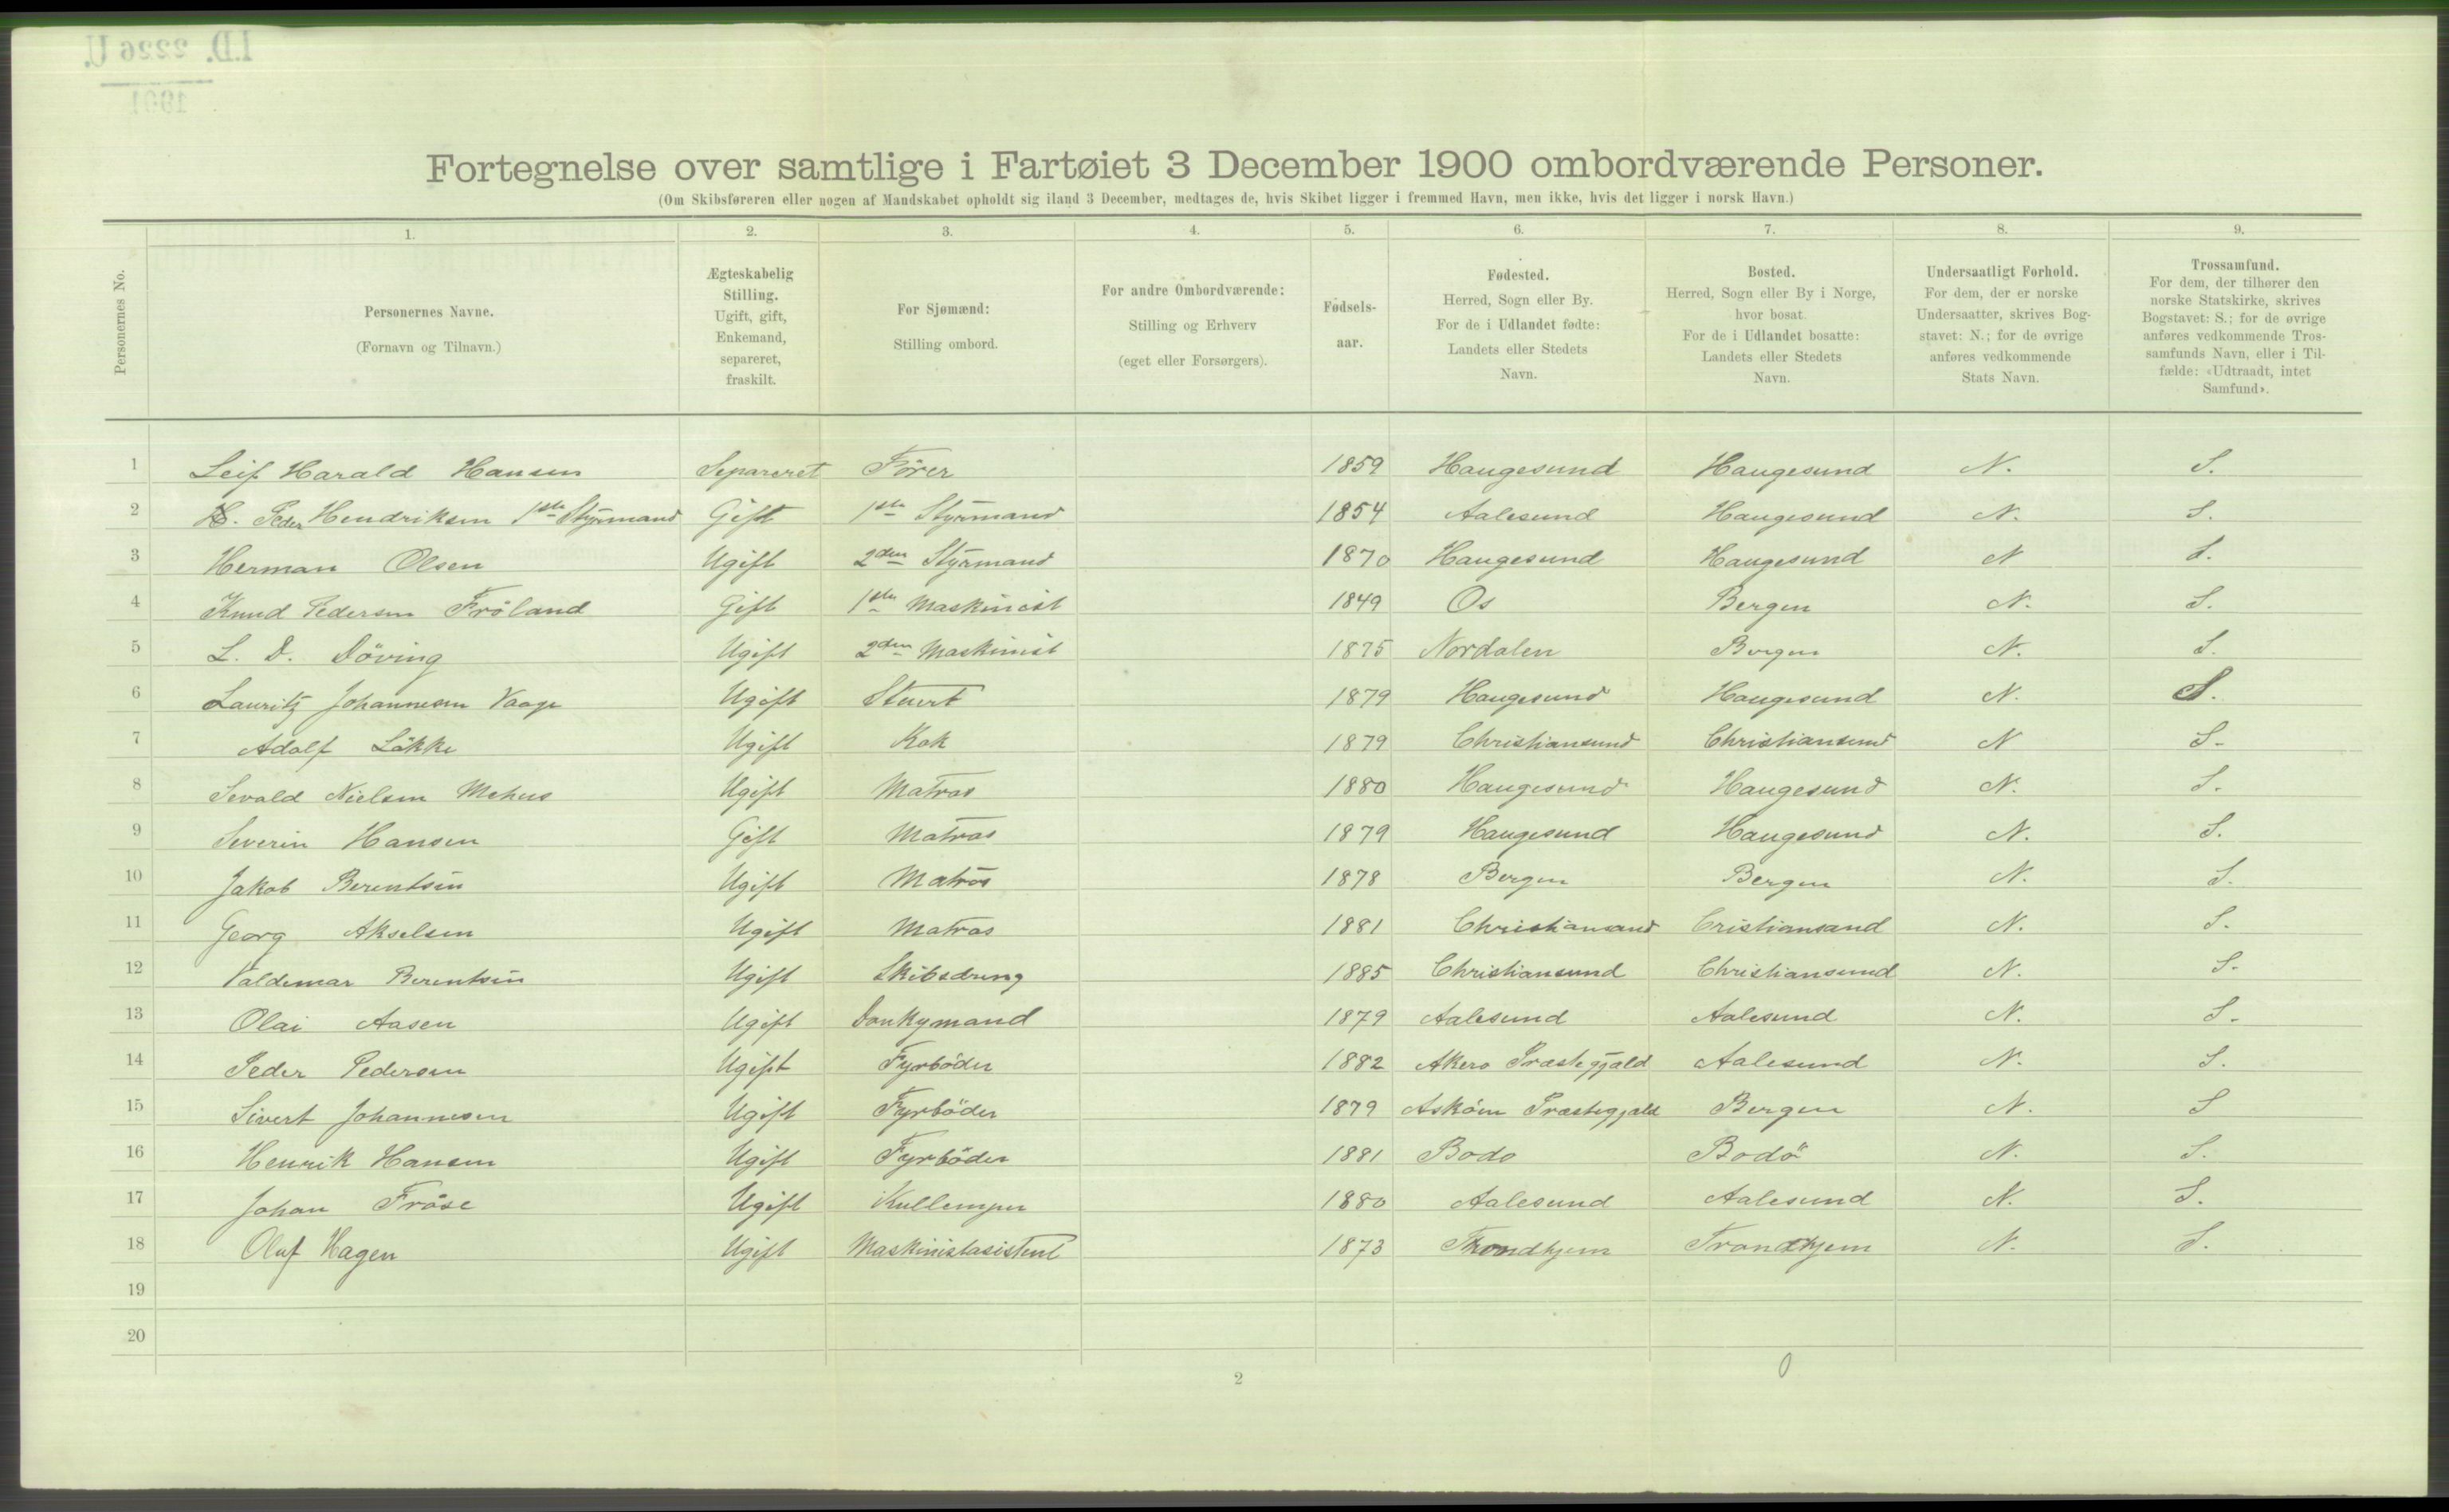 RA, 1900 Census - ship lists from ships in Norwegian harbours, harbours abroad and at sea, 1900, p. 5636